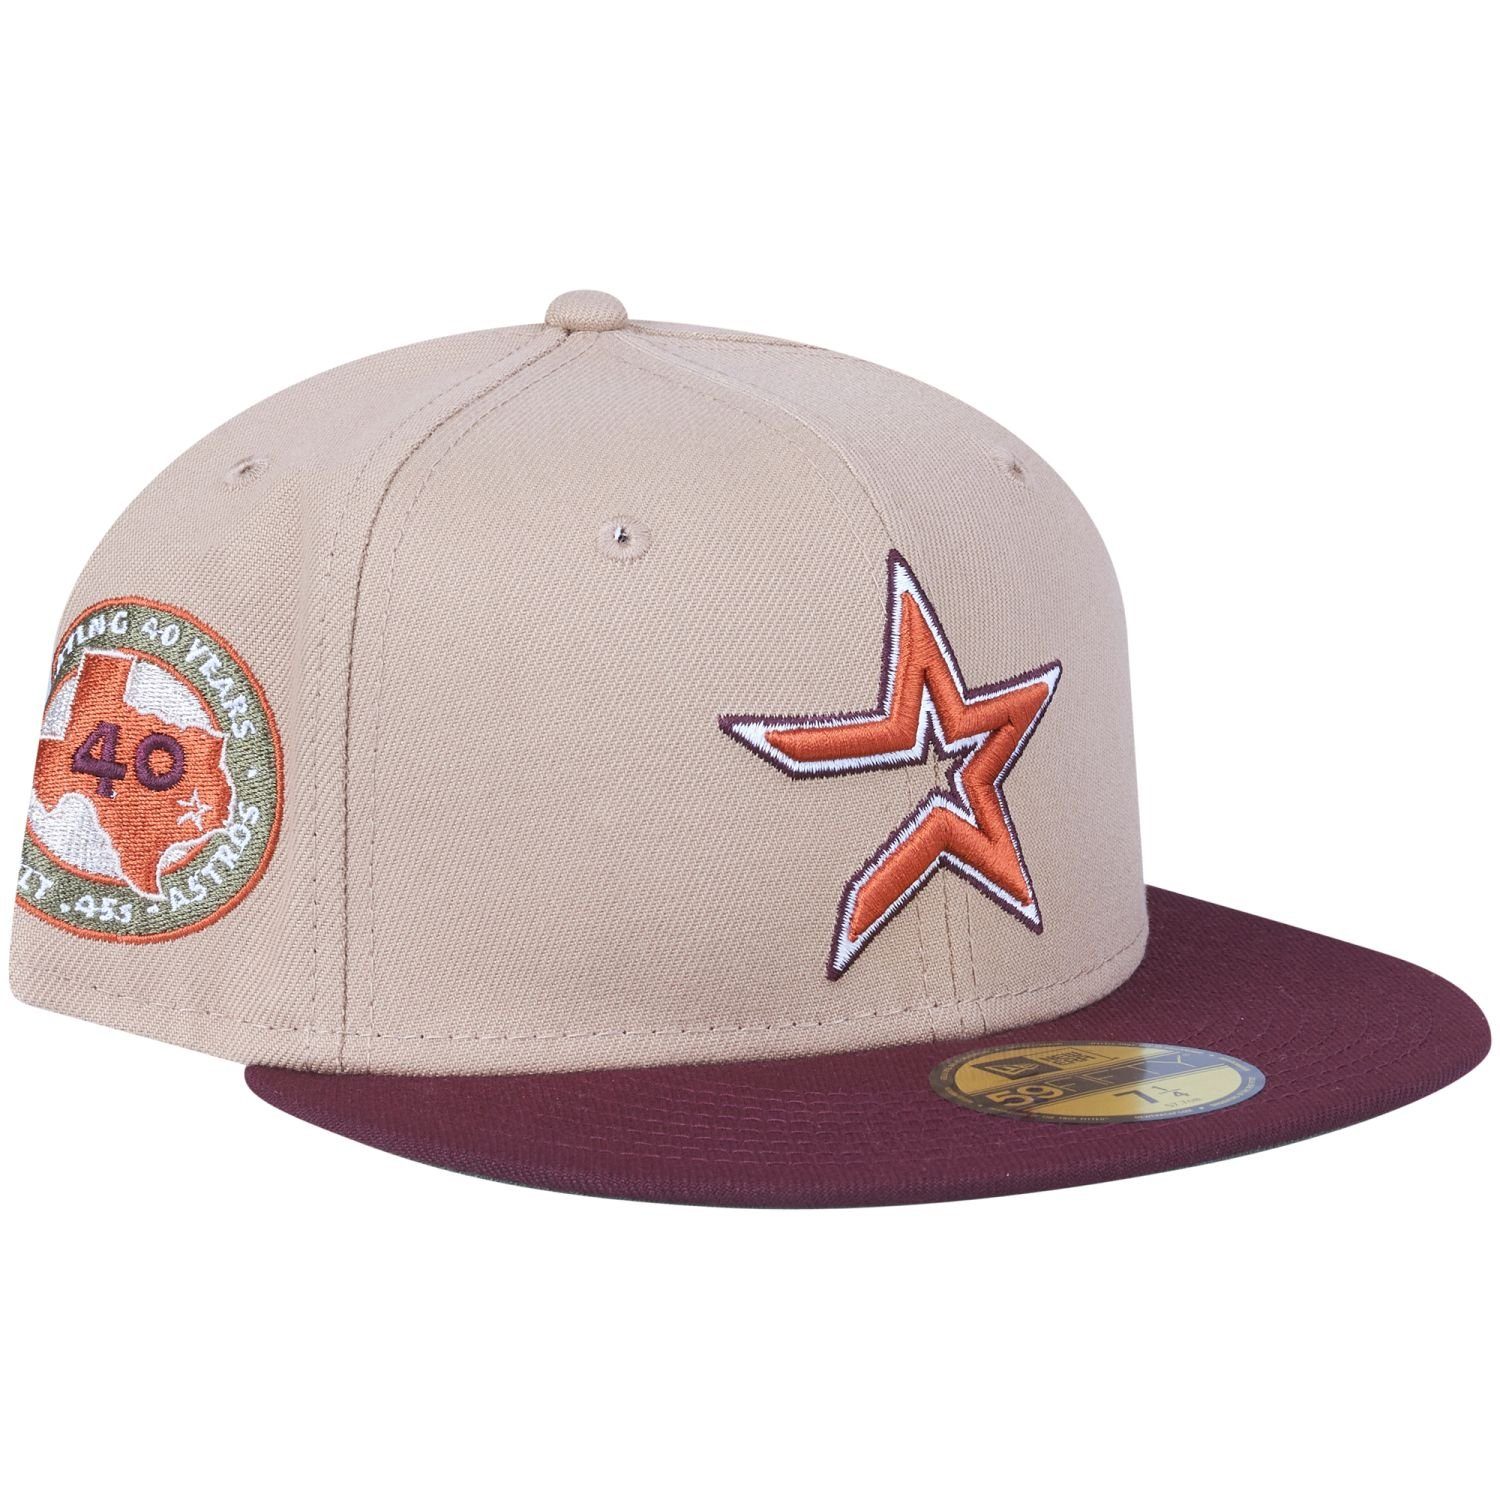 Cap Era 59Fifty New Houston COOPERSTOWN Fitted Astros